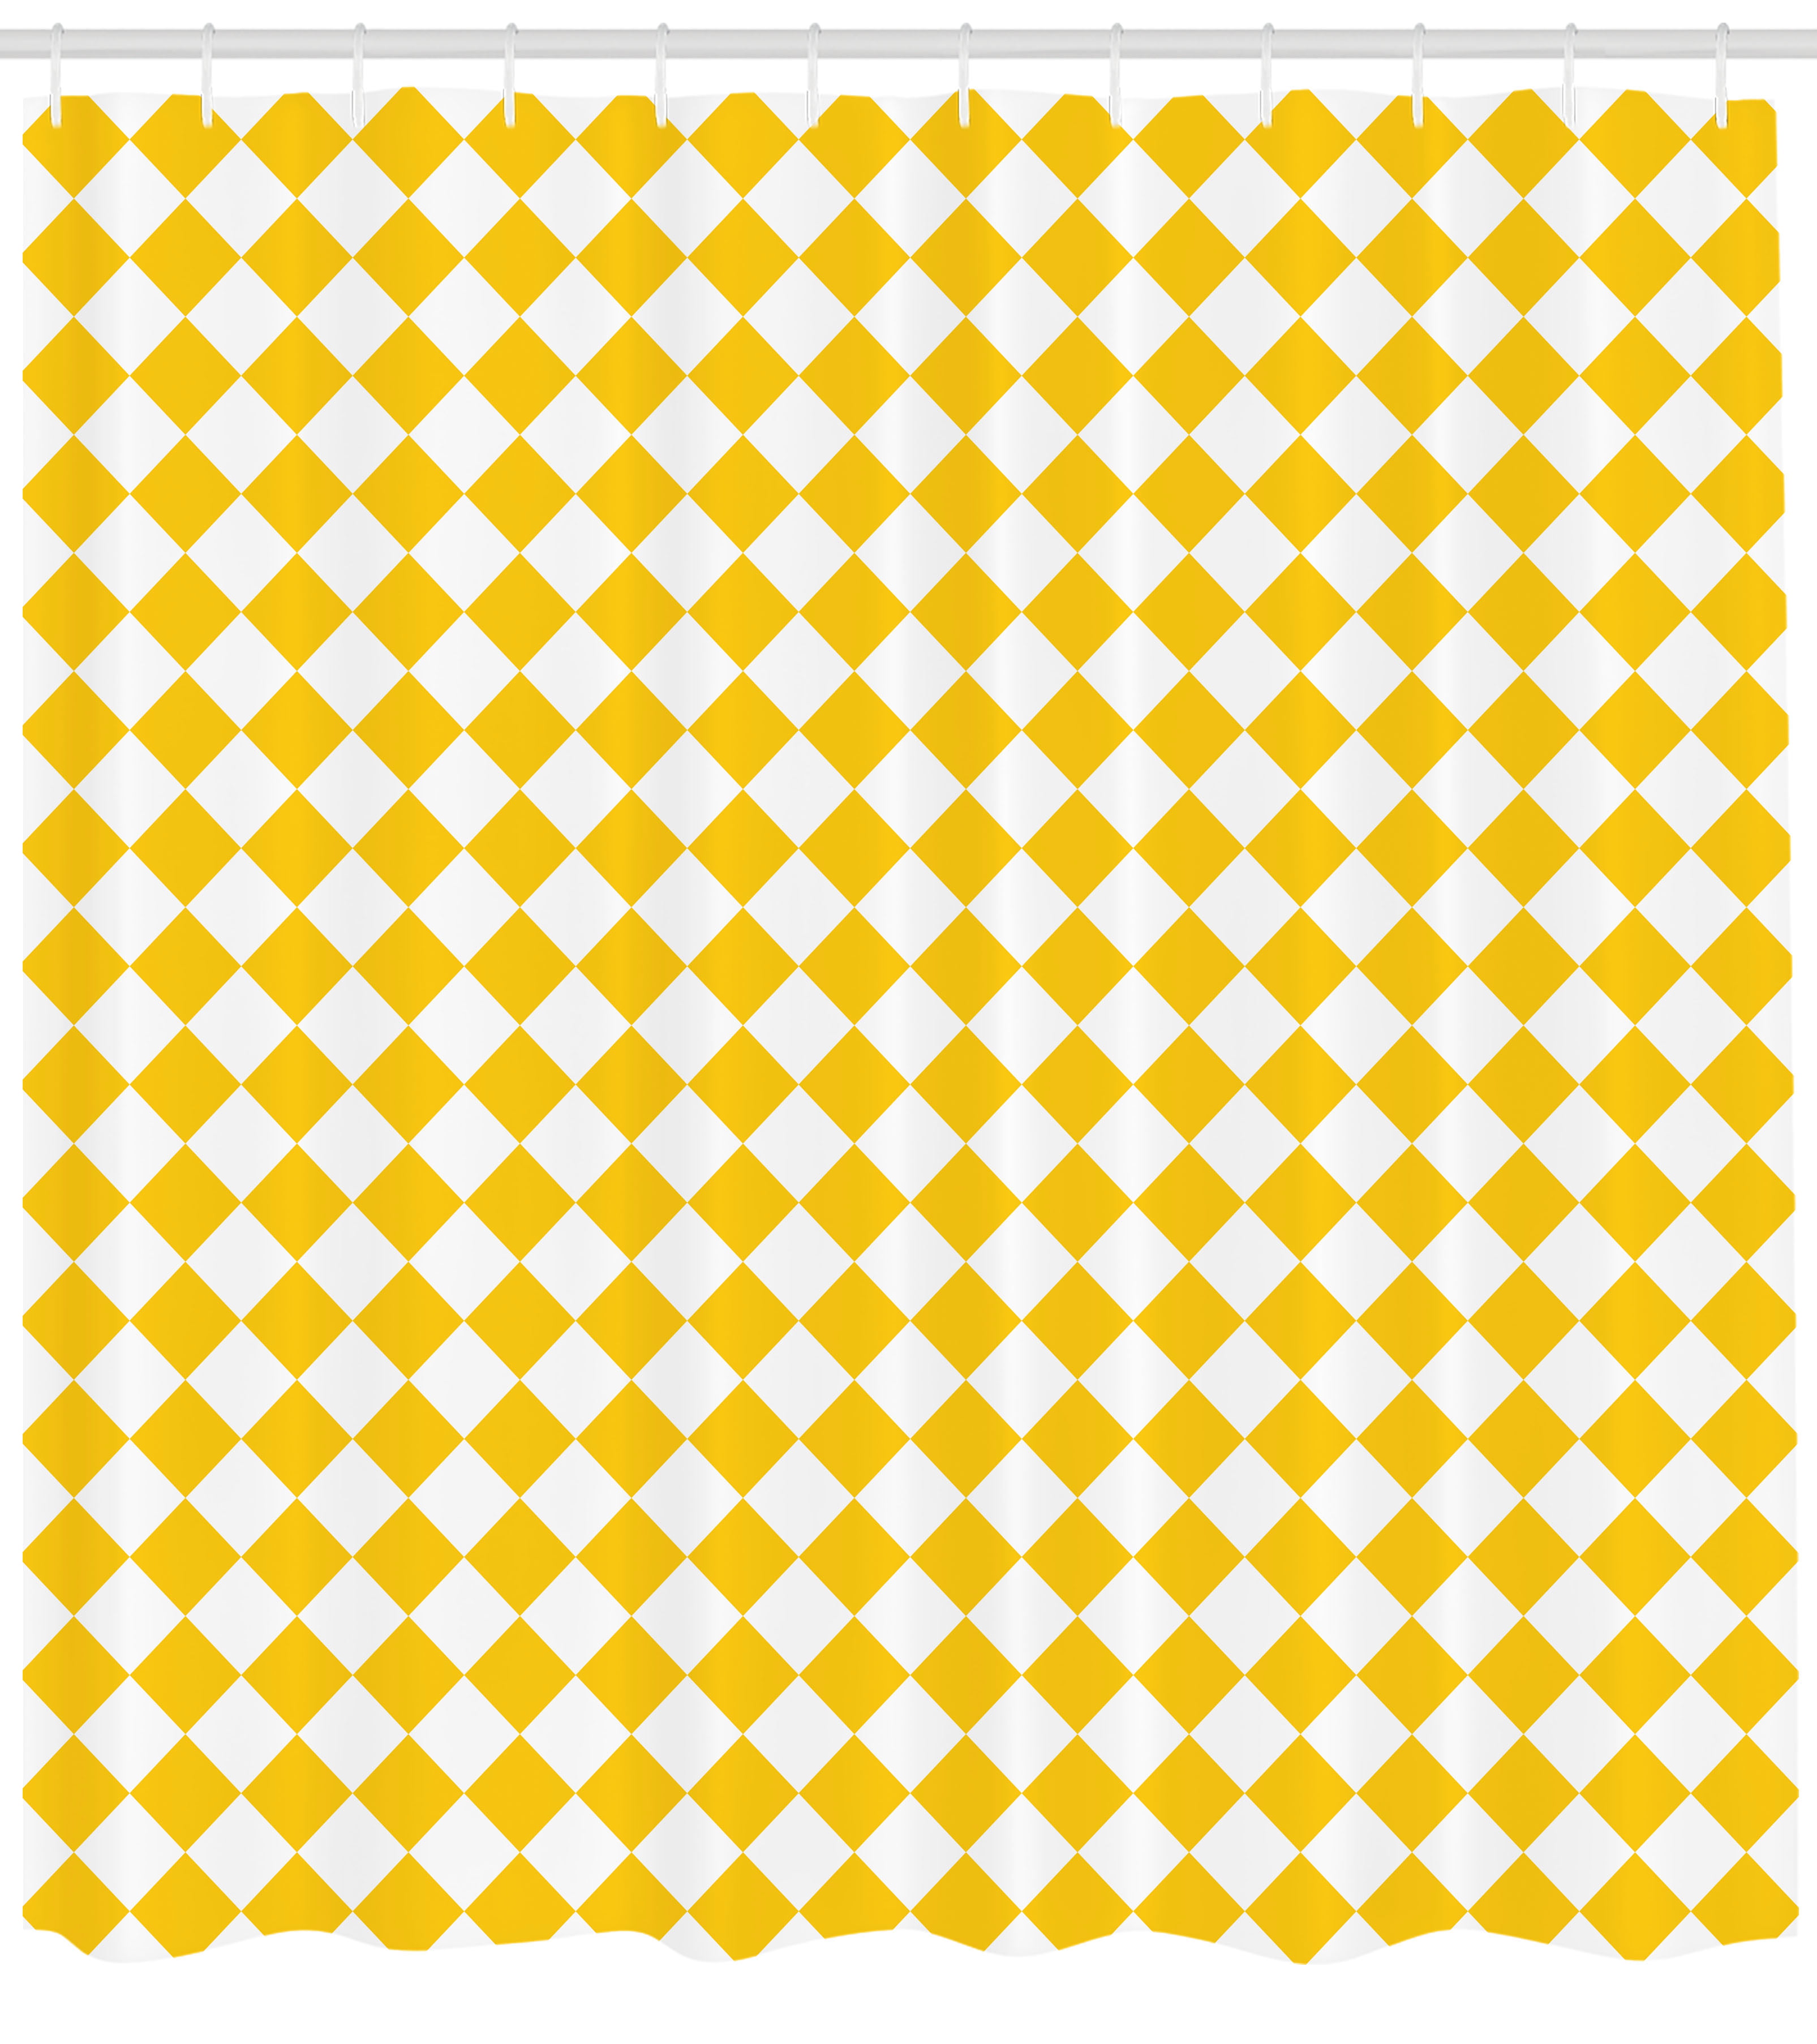 Yellow and White Shower Curtain, Diagonal Checkered Old Fashioned Retro ...